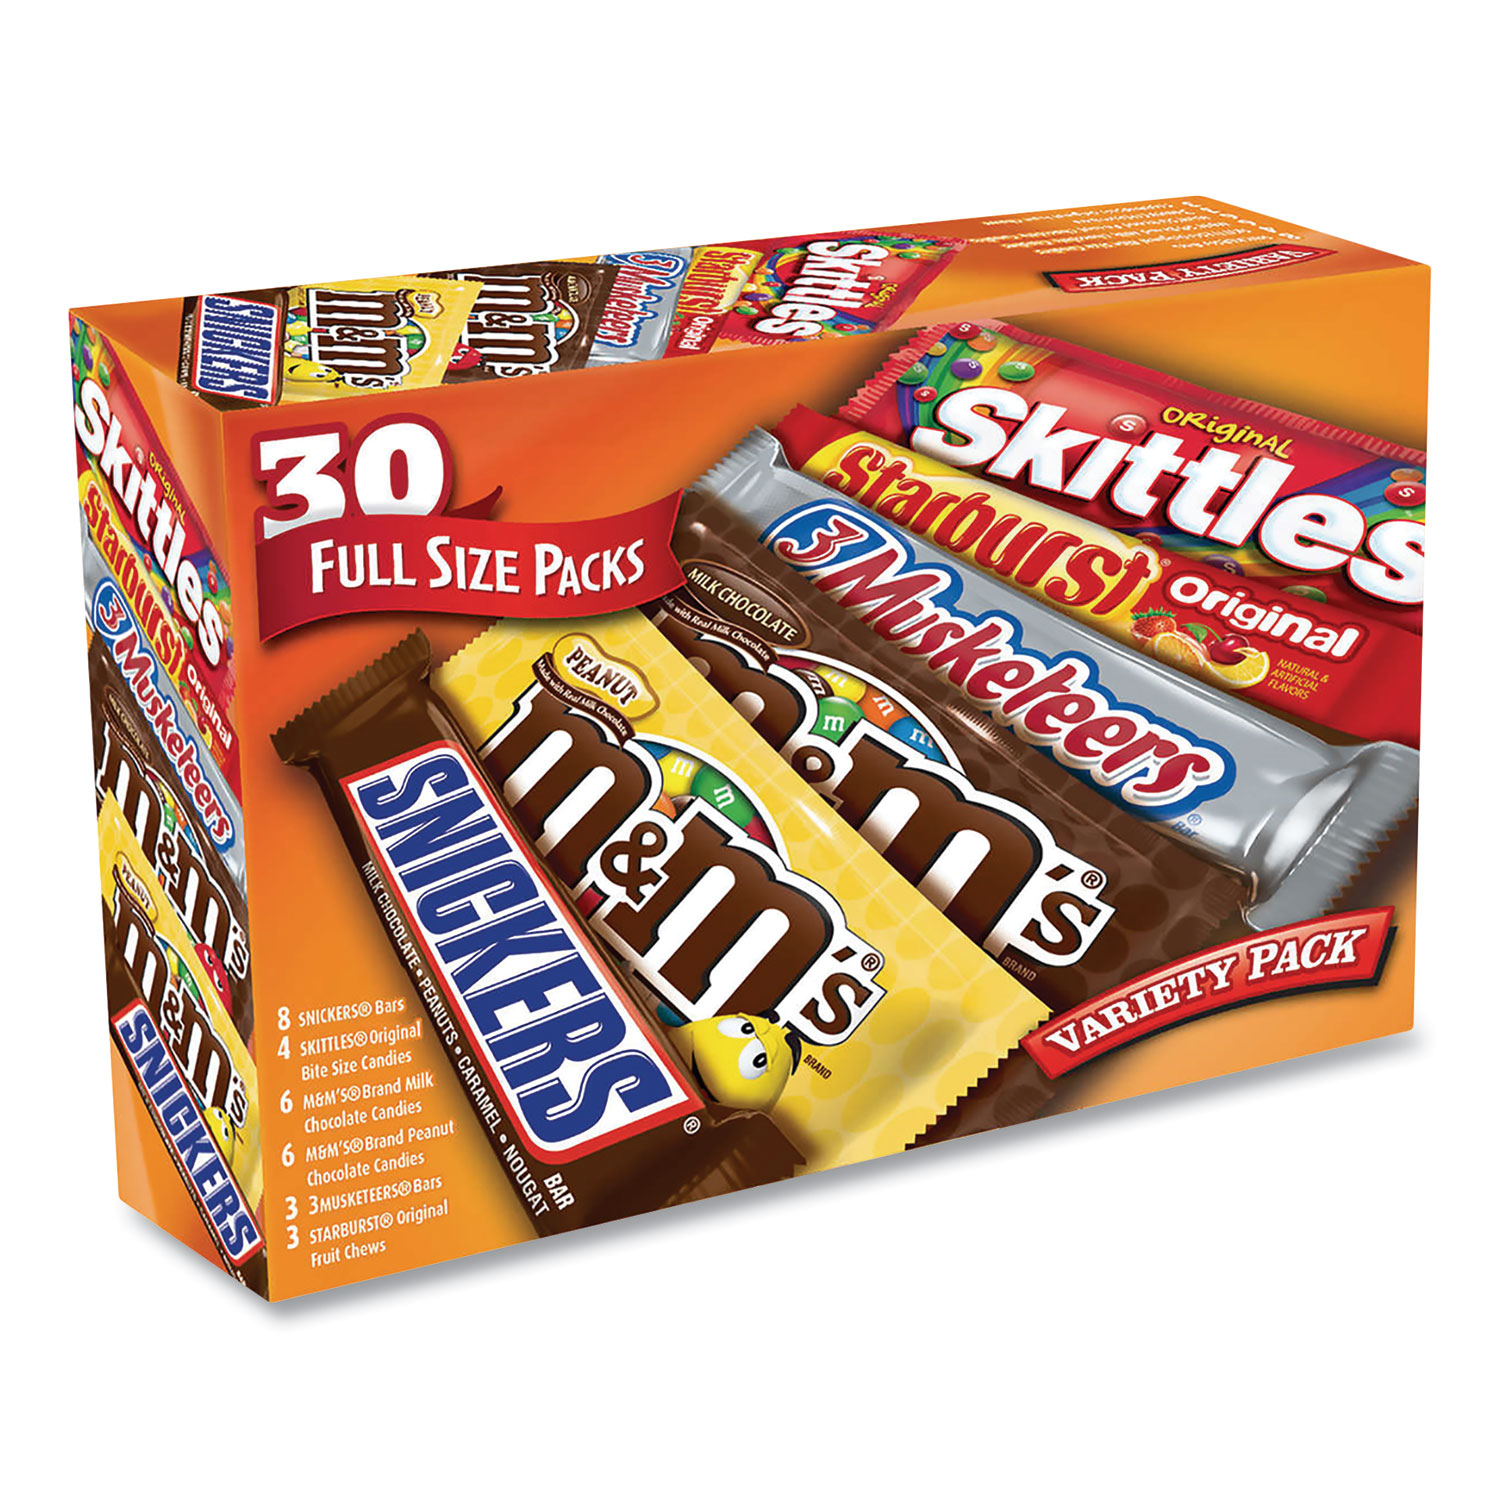  MARS 30031 Full-Size Candy Bars Variety Pack, Assorted, 30/Box, Free Delivery in 1-4 Business Days (GRR22000084) 